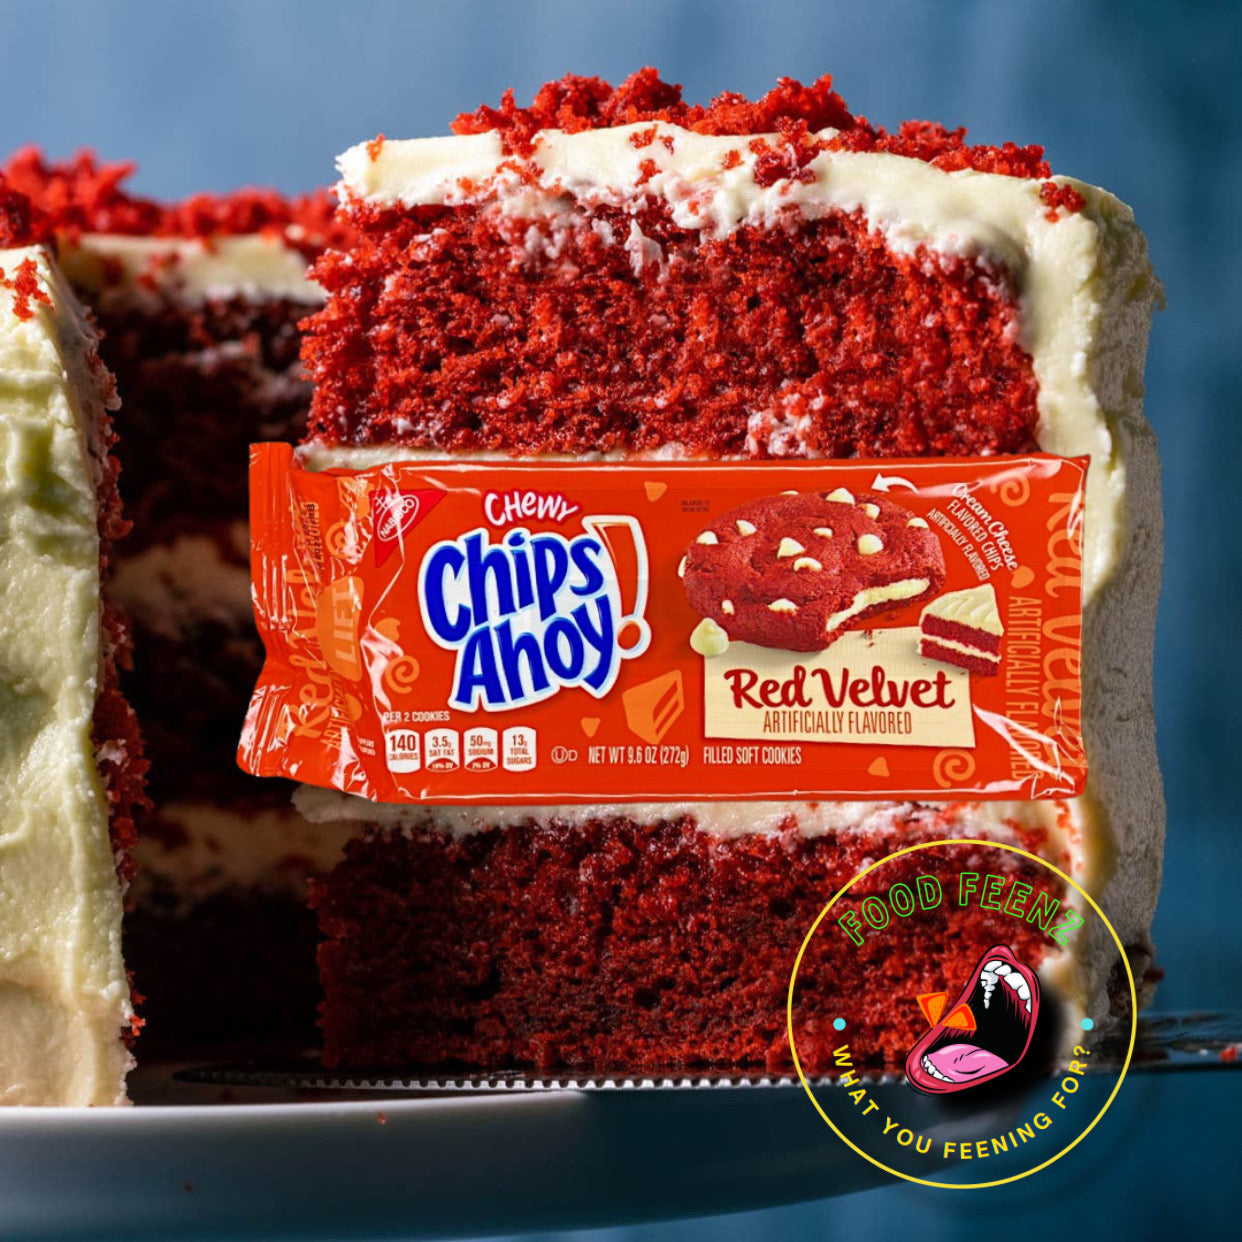 Chewy Chips Ahoy Red Velvet Cream Flavored